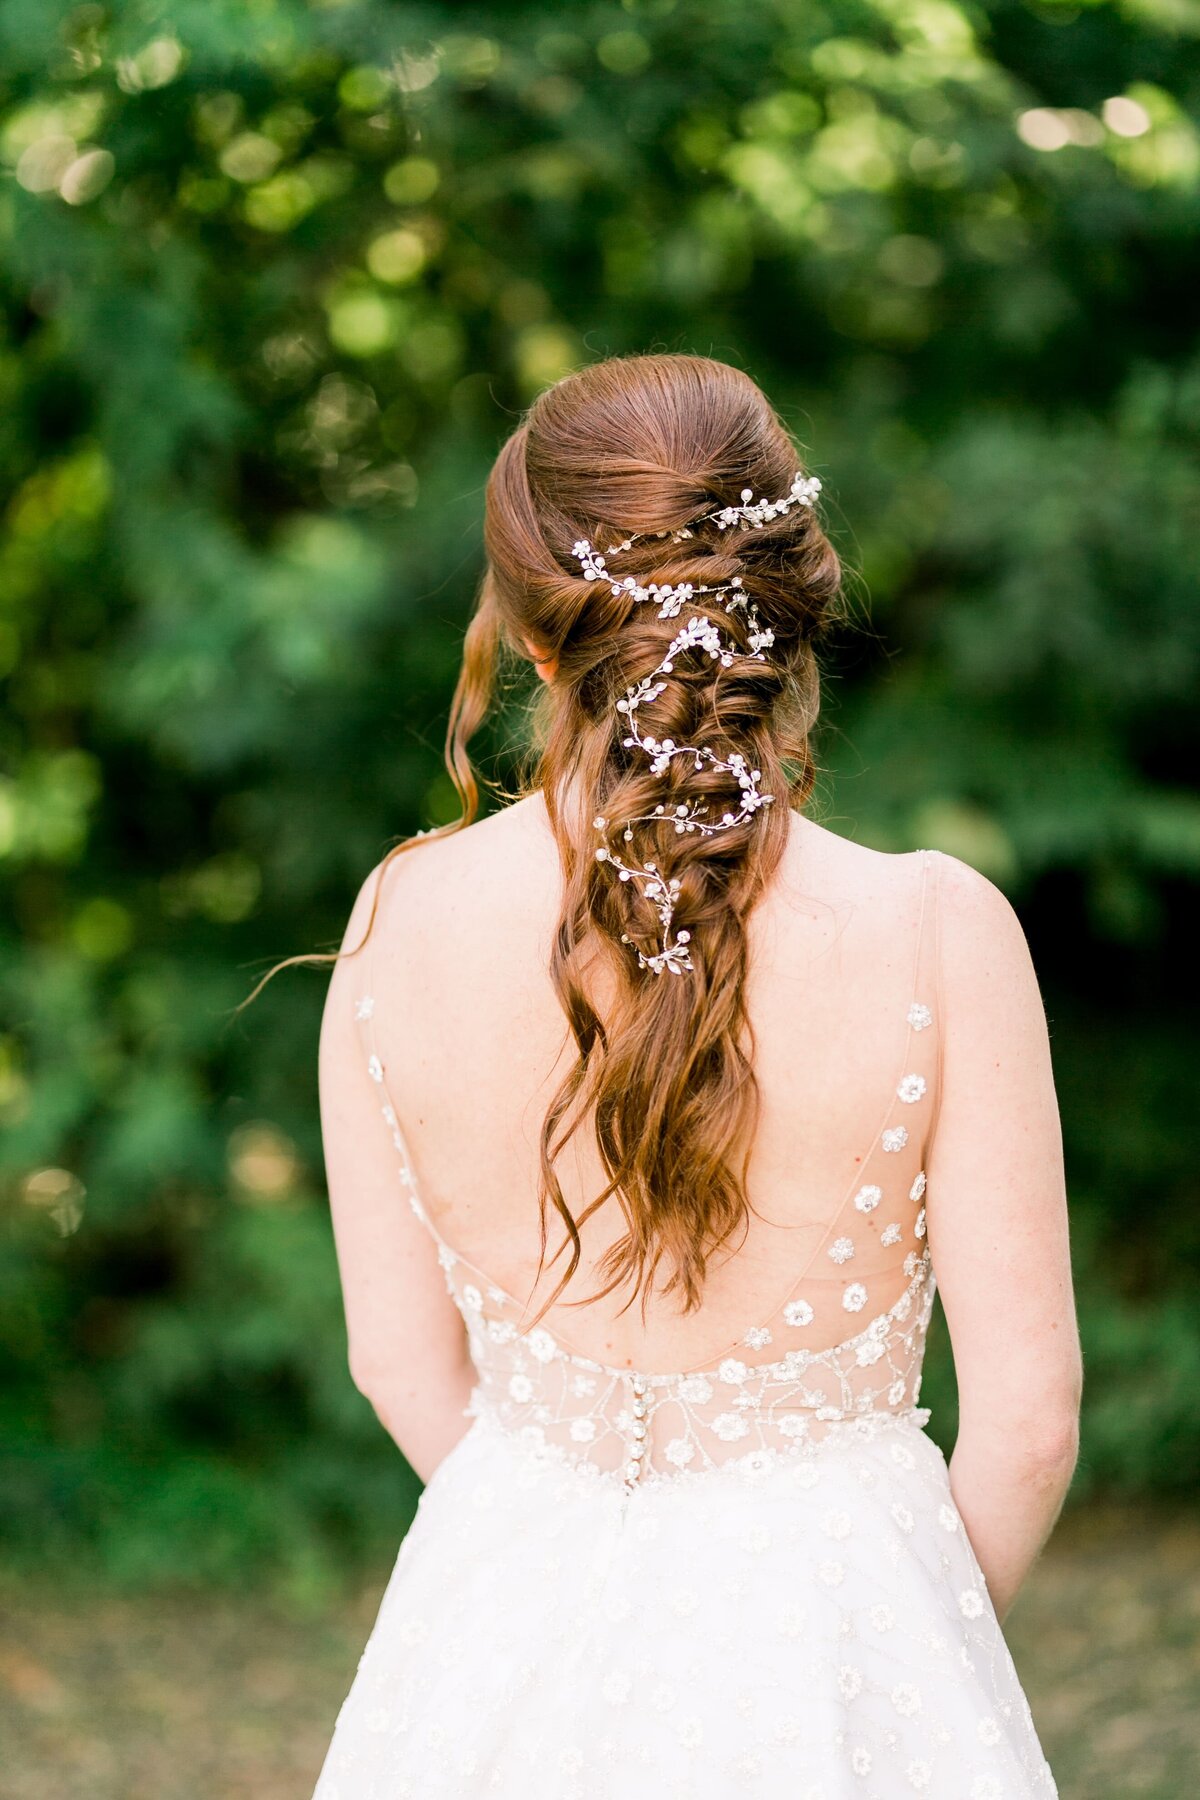 Lilly Bridal Artistry - Wedding hair and makeup artist